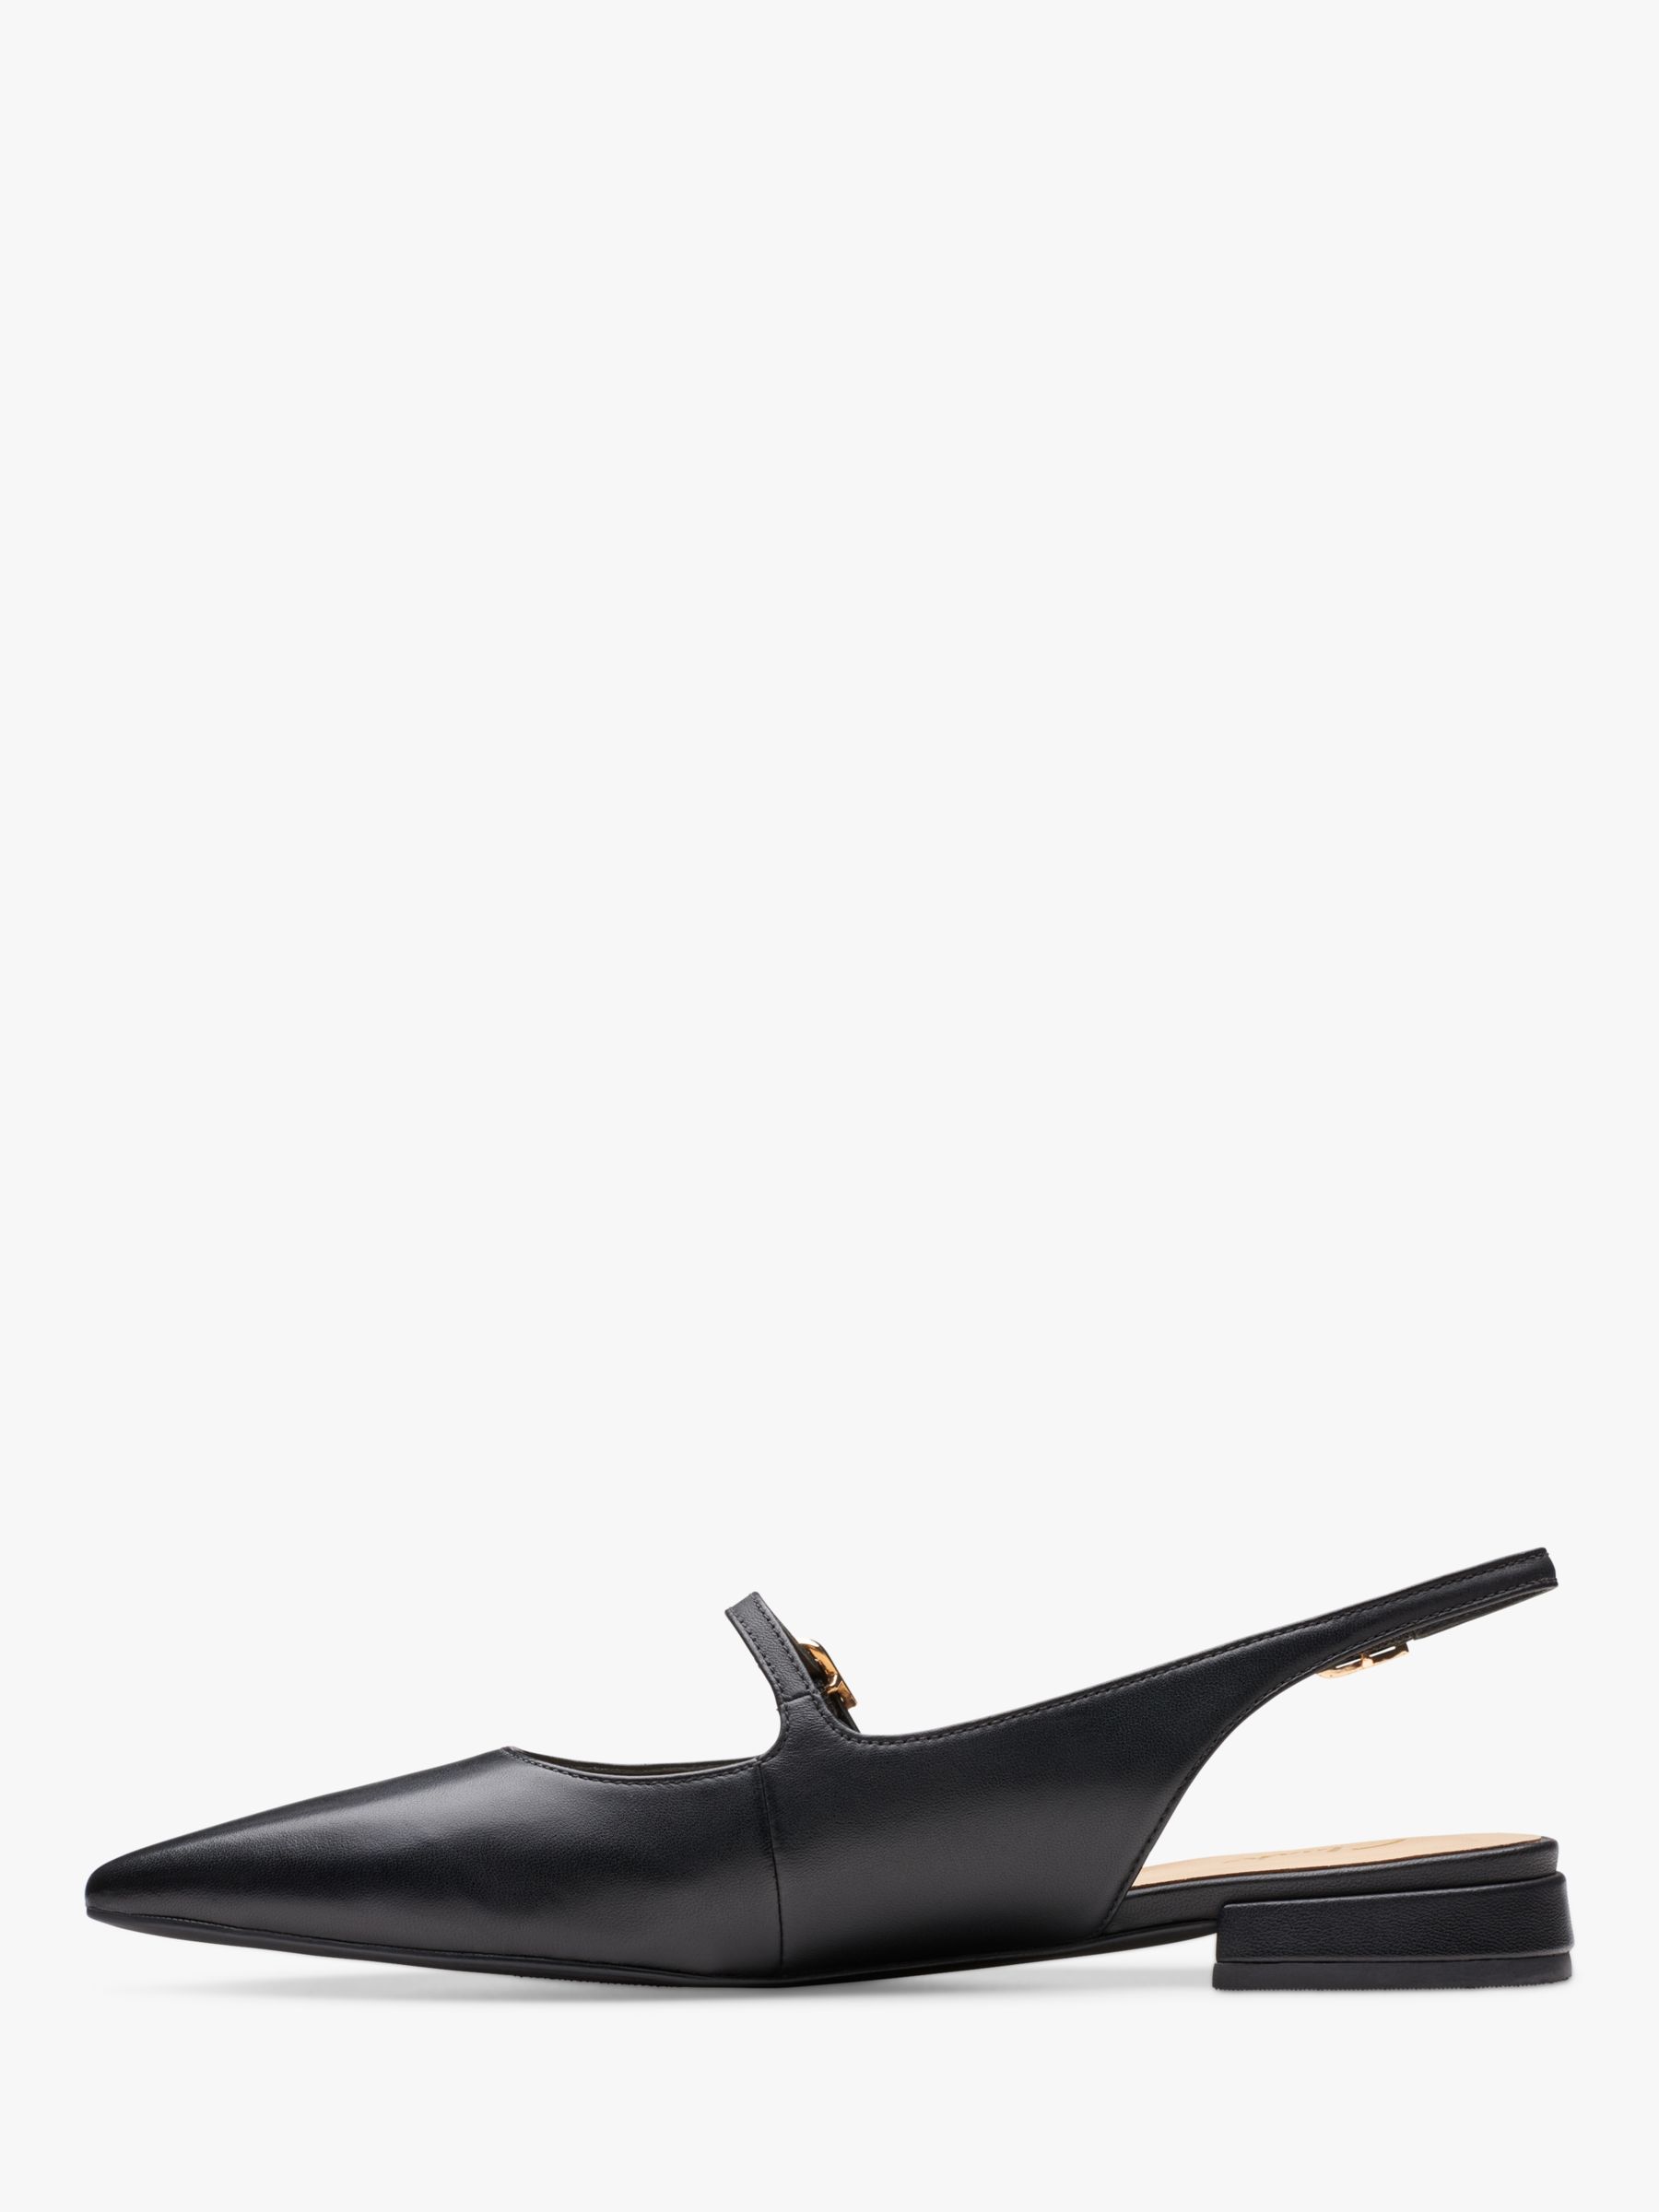 Clarks Sensa 15 Pointed Toe Leather Slingback Pumps, Black Leather at ...